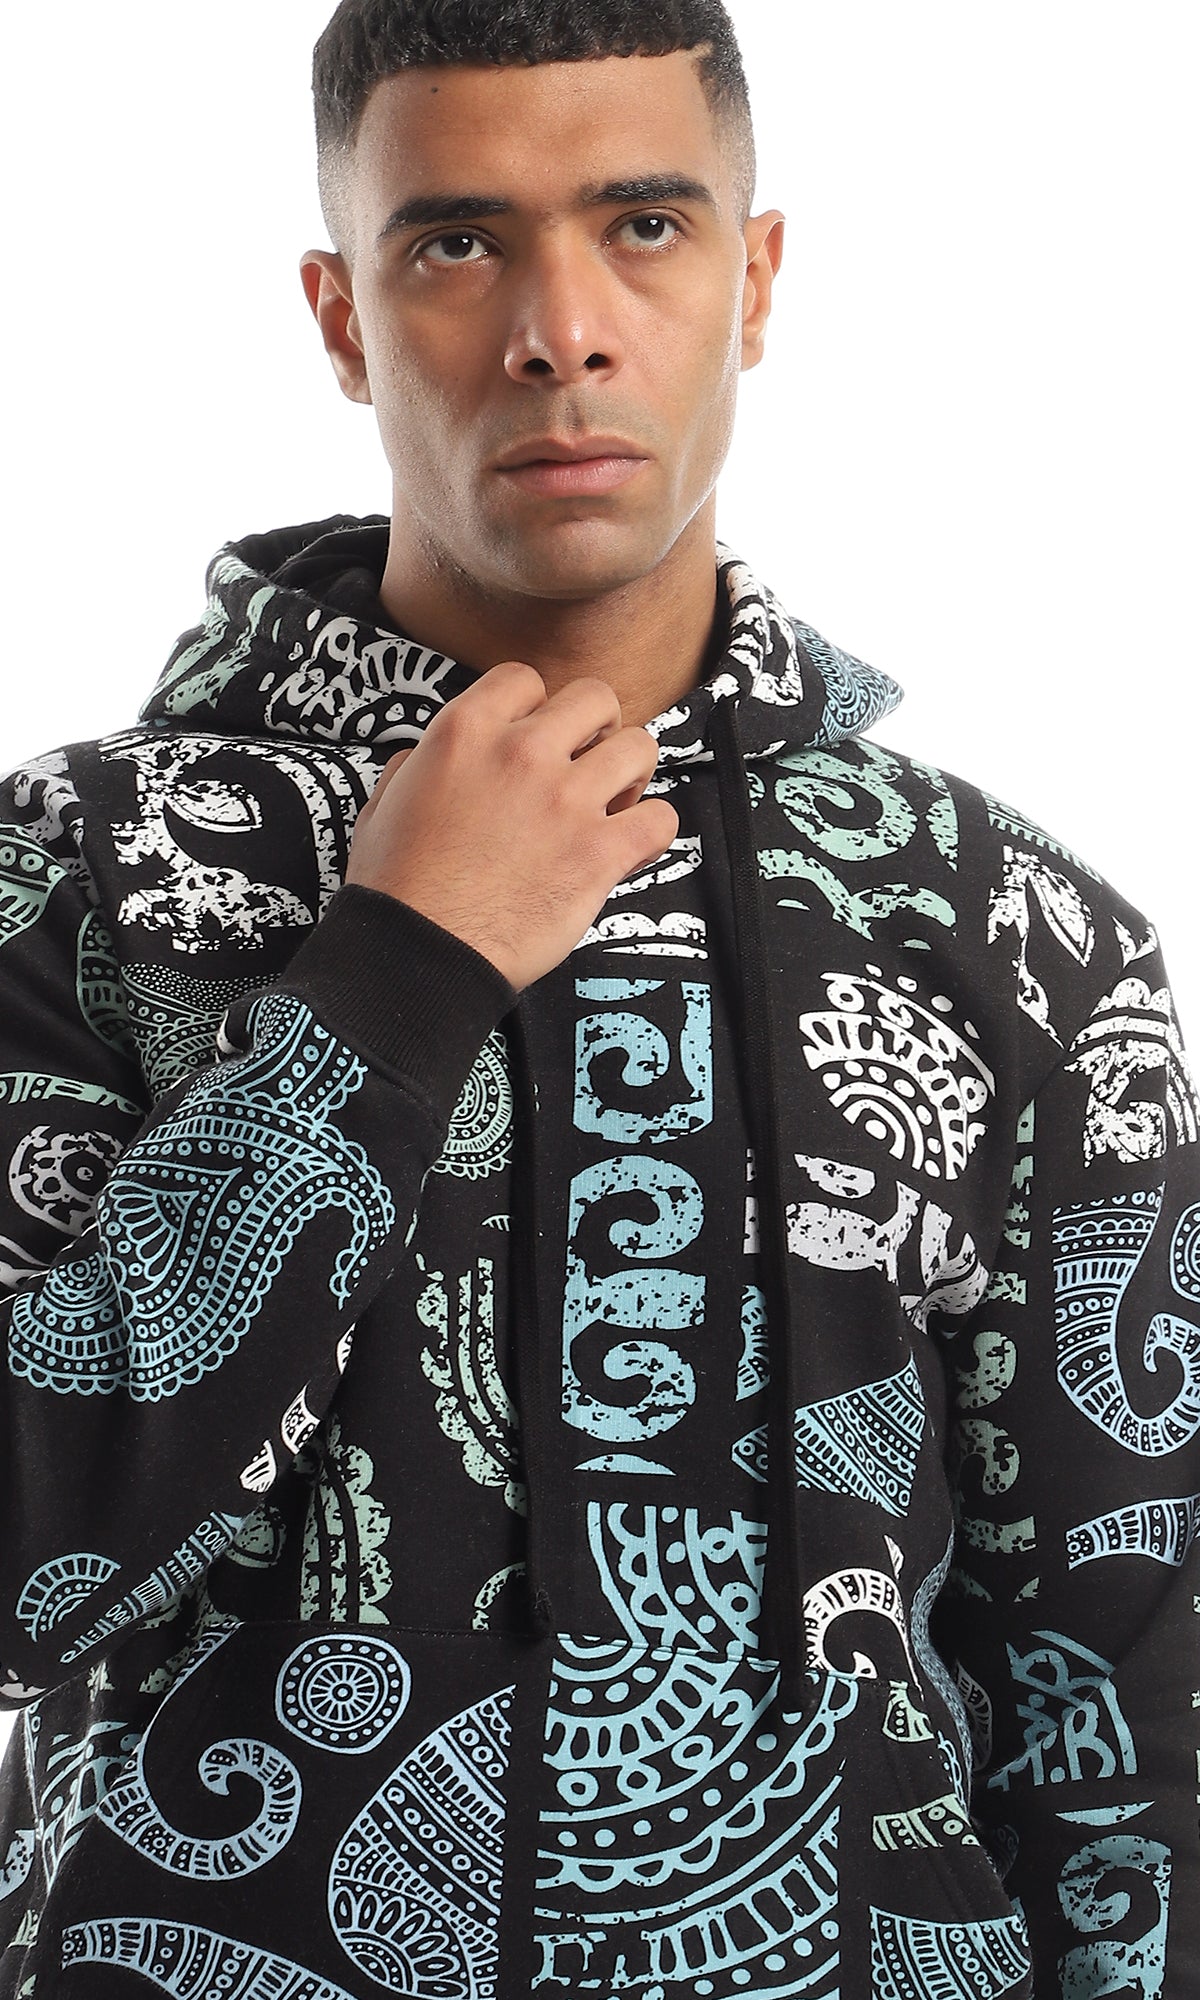 O151536 Multipatterned Fleece Hoodie With Round Neck - Black, Green & White